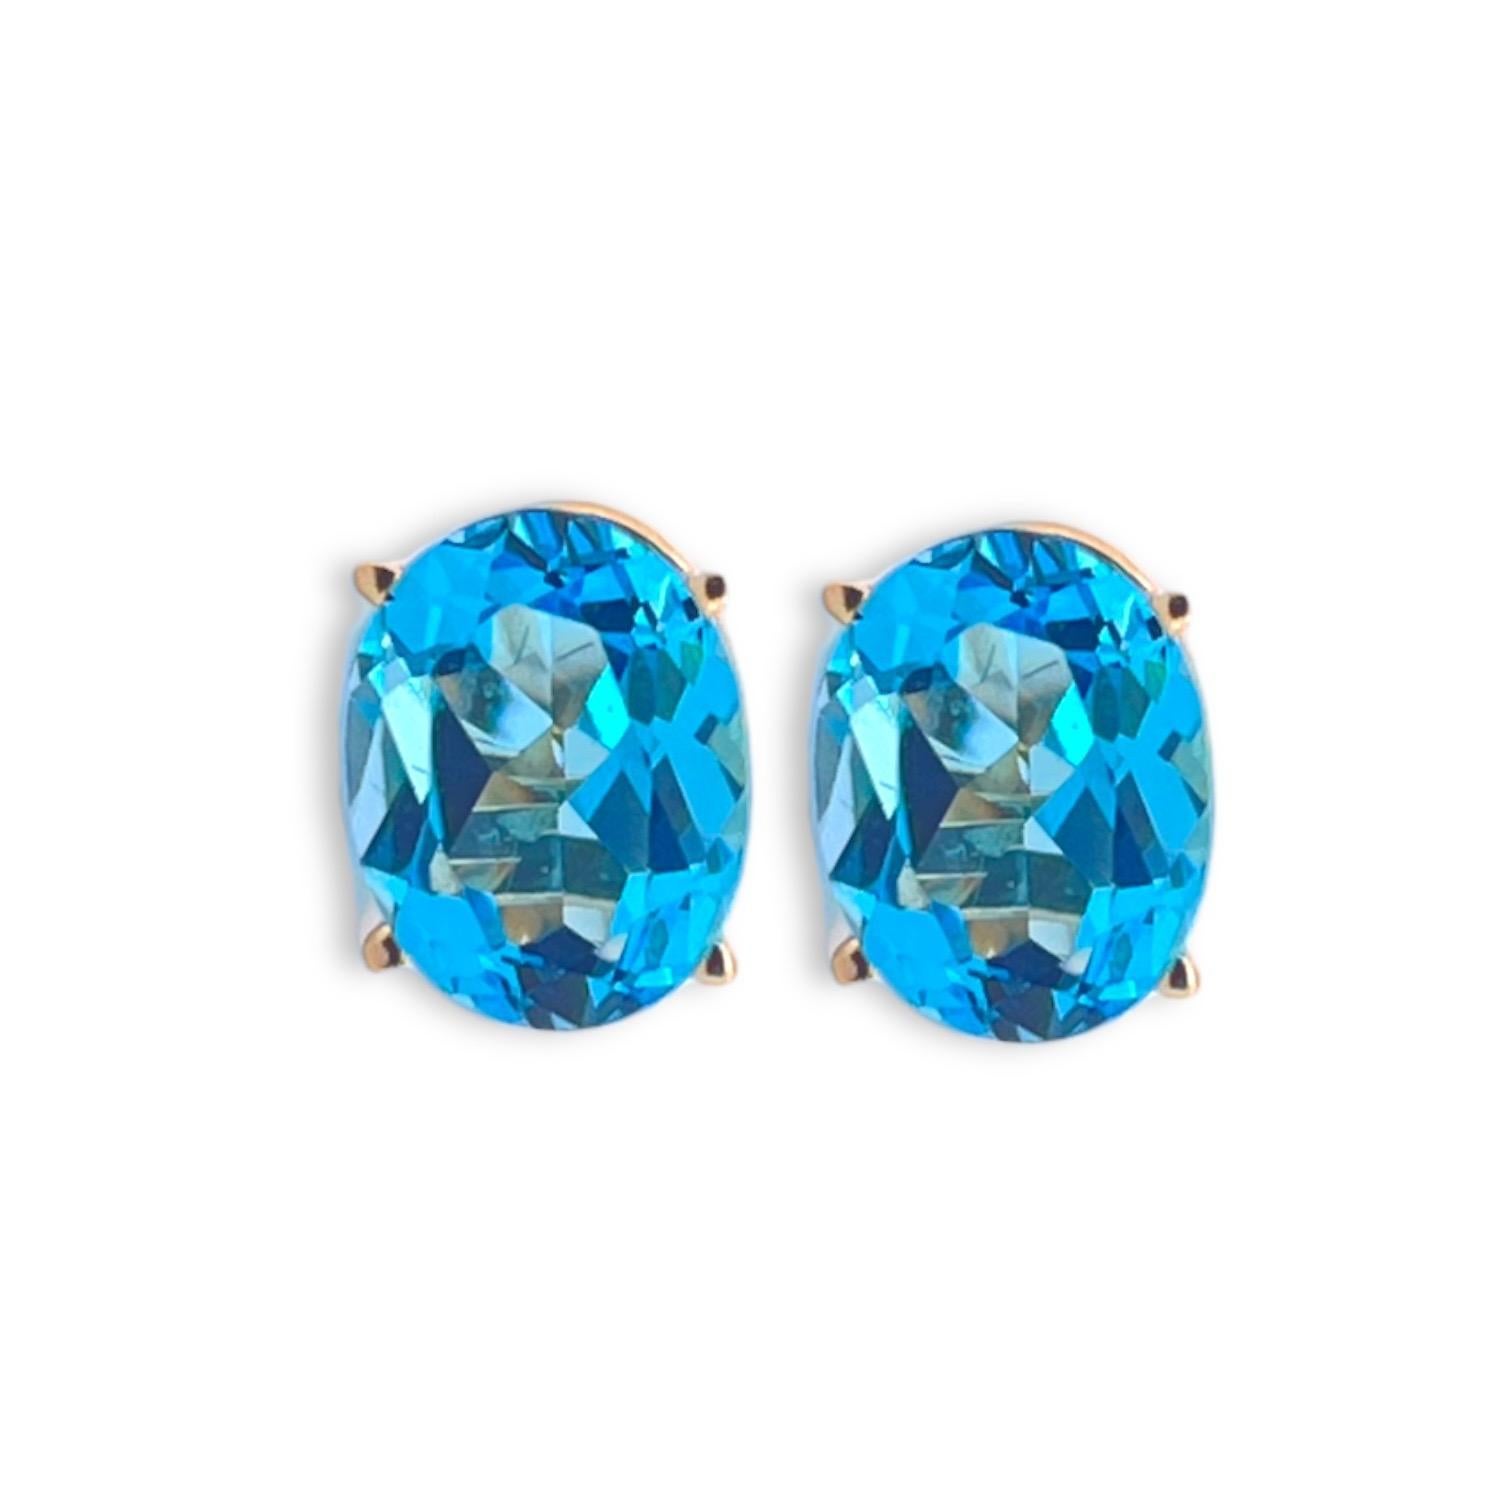 Immerse yourself in the serene beauty of our Enchanting Azure Bliss Oval Blue Topaz Stud Earrings, exquisitely crafted with the finest 14K yellow gold. Each earring, weighing 1.86 grams, features an impeccably cut oval blue topaz, a gemstone